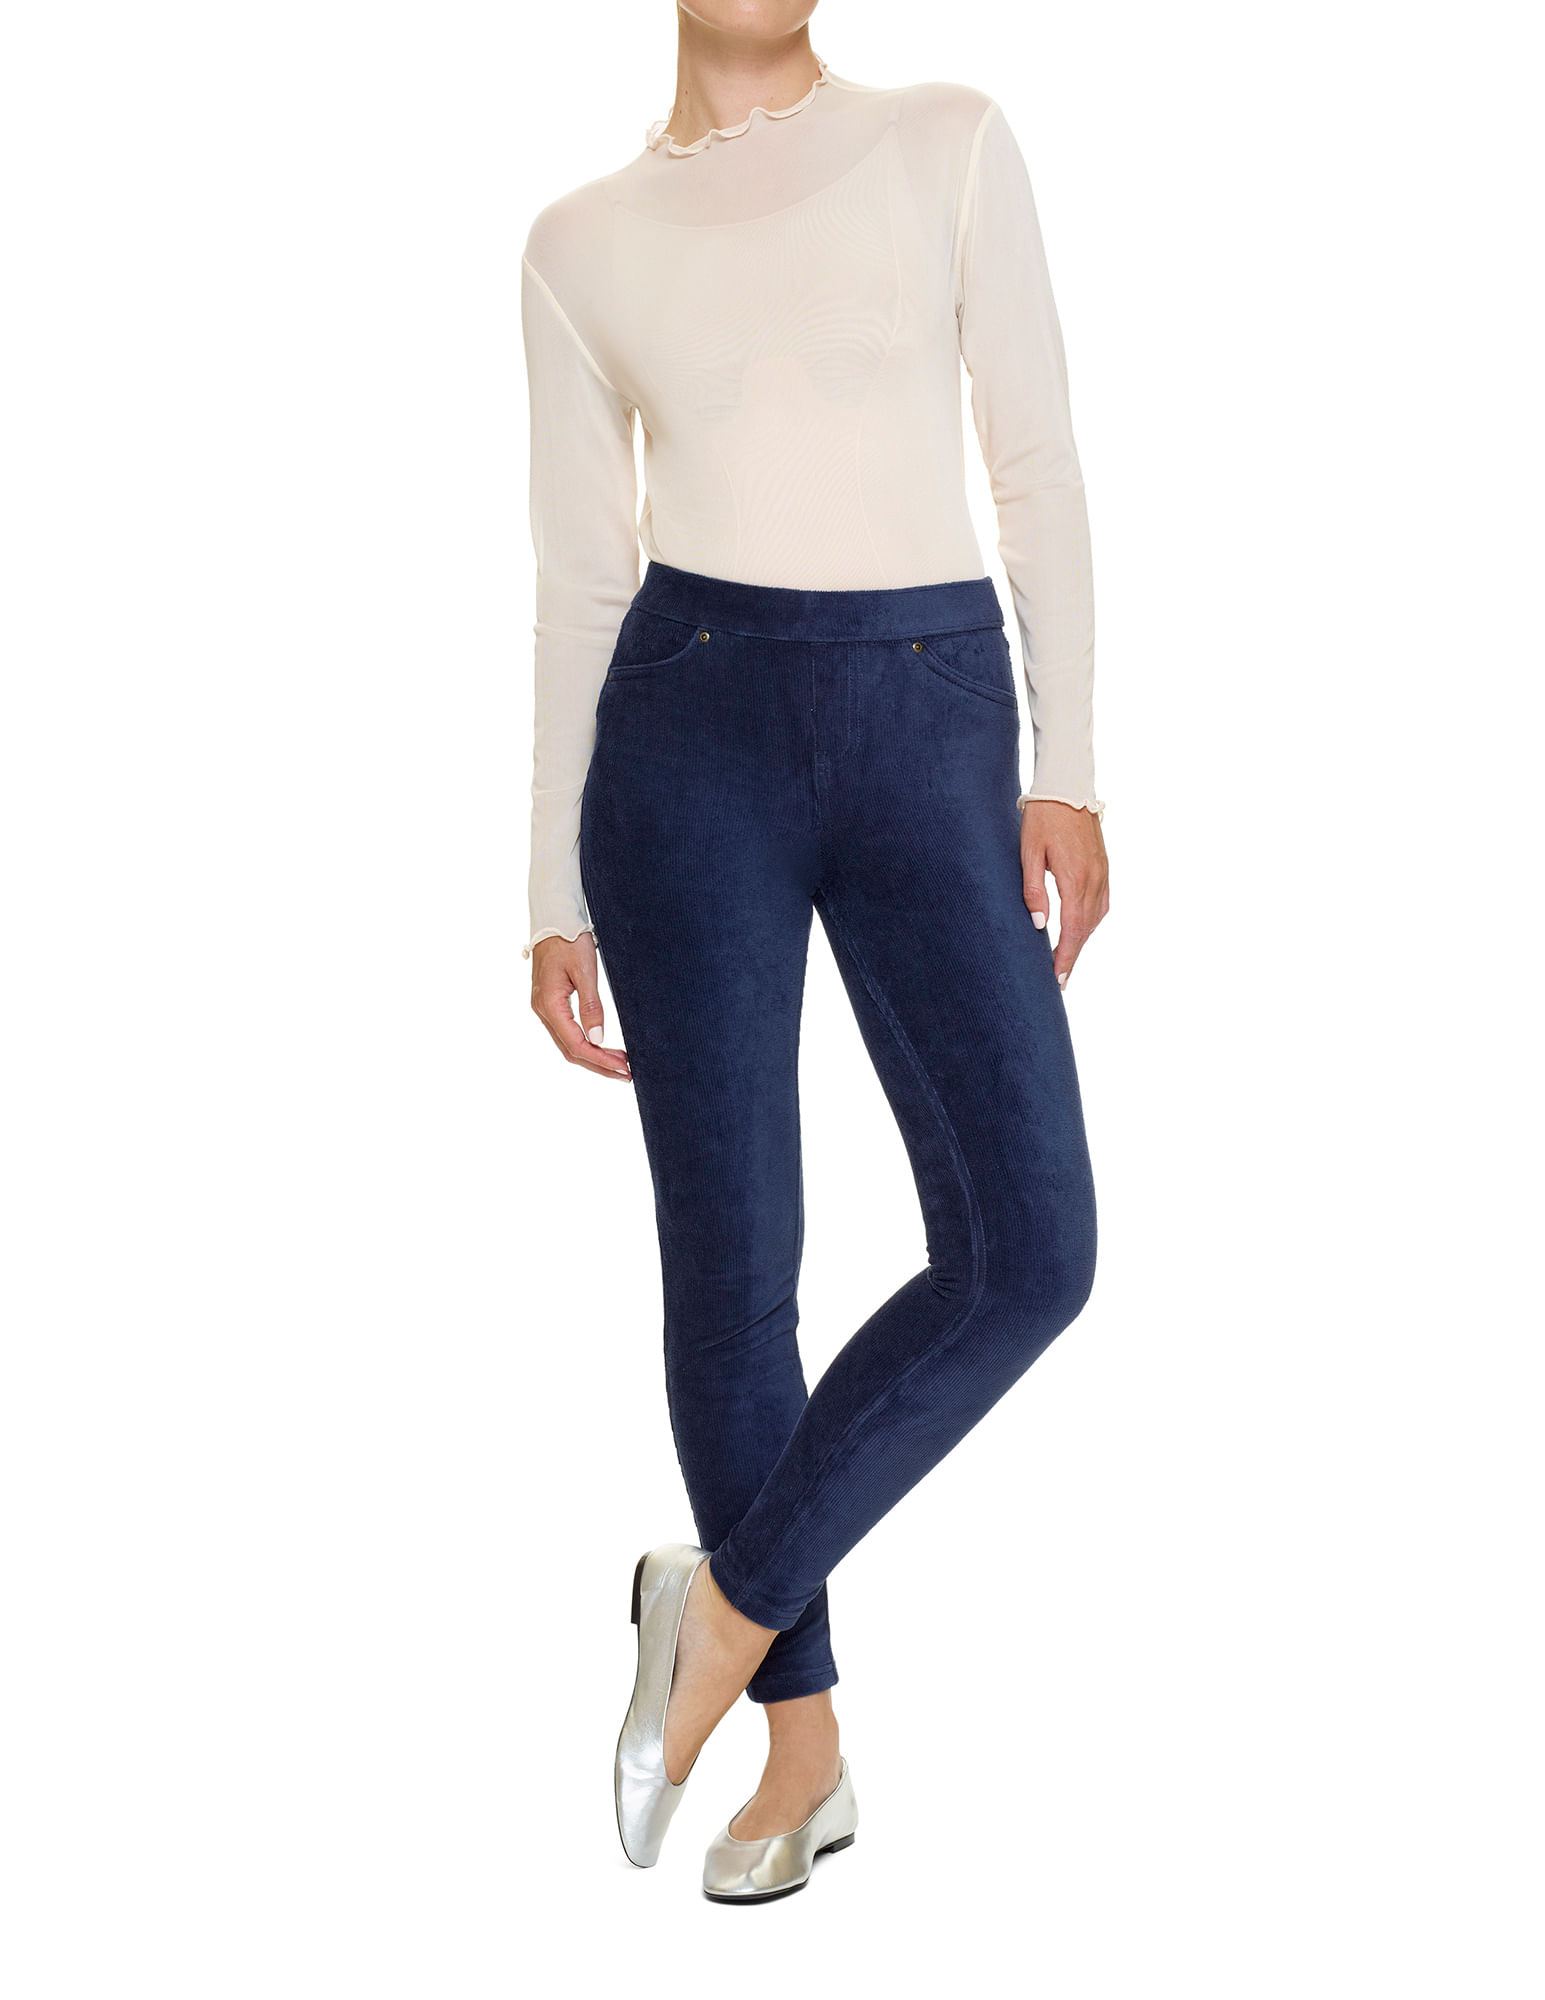 Happiness Istanbul High Waist Corduroy Seamless Knitted Leggings 2024, Buy  Happiness Istanbul Online